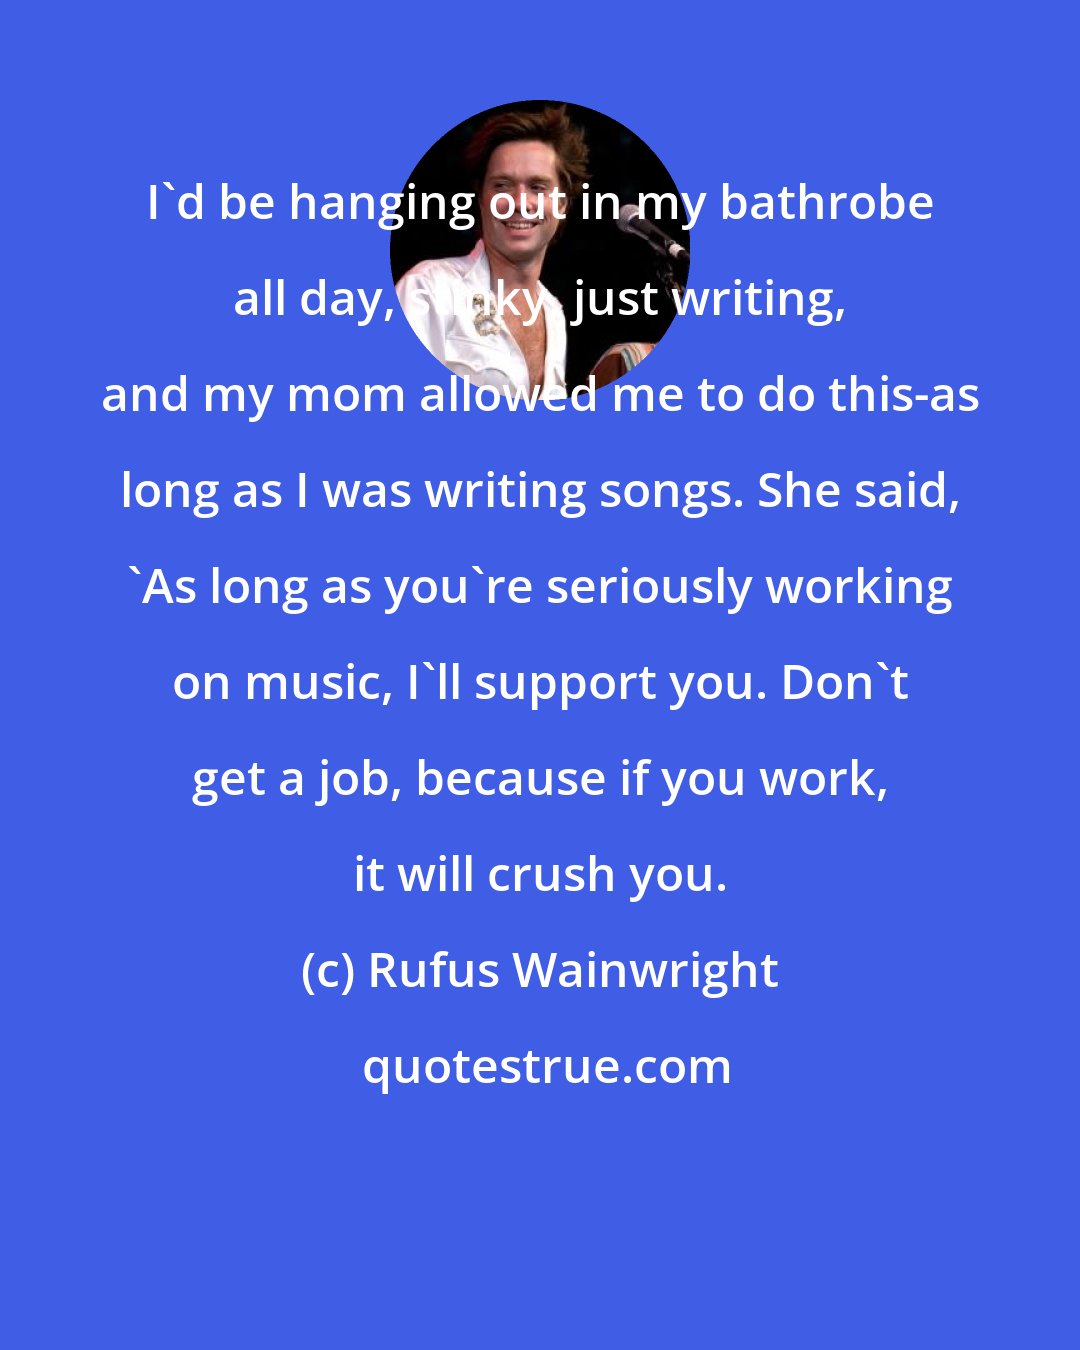 Rufus Wainwright: I'd be hanging out in my bathrobe all day, stinky, just writing, and my mom allowed me to do this-as long as I was writing songs. She said, 'As long as you're seriously working on music, I'll support you. Don't get a job, because if you work, it will crush you.